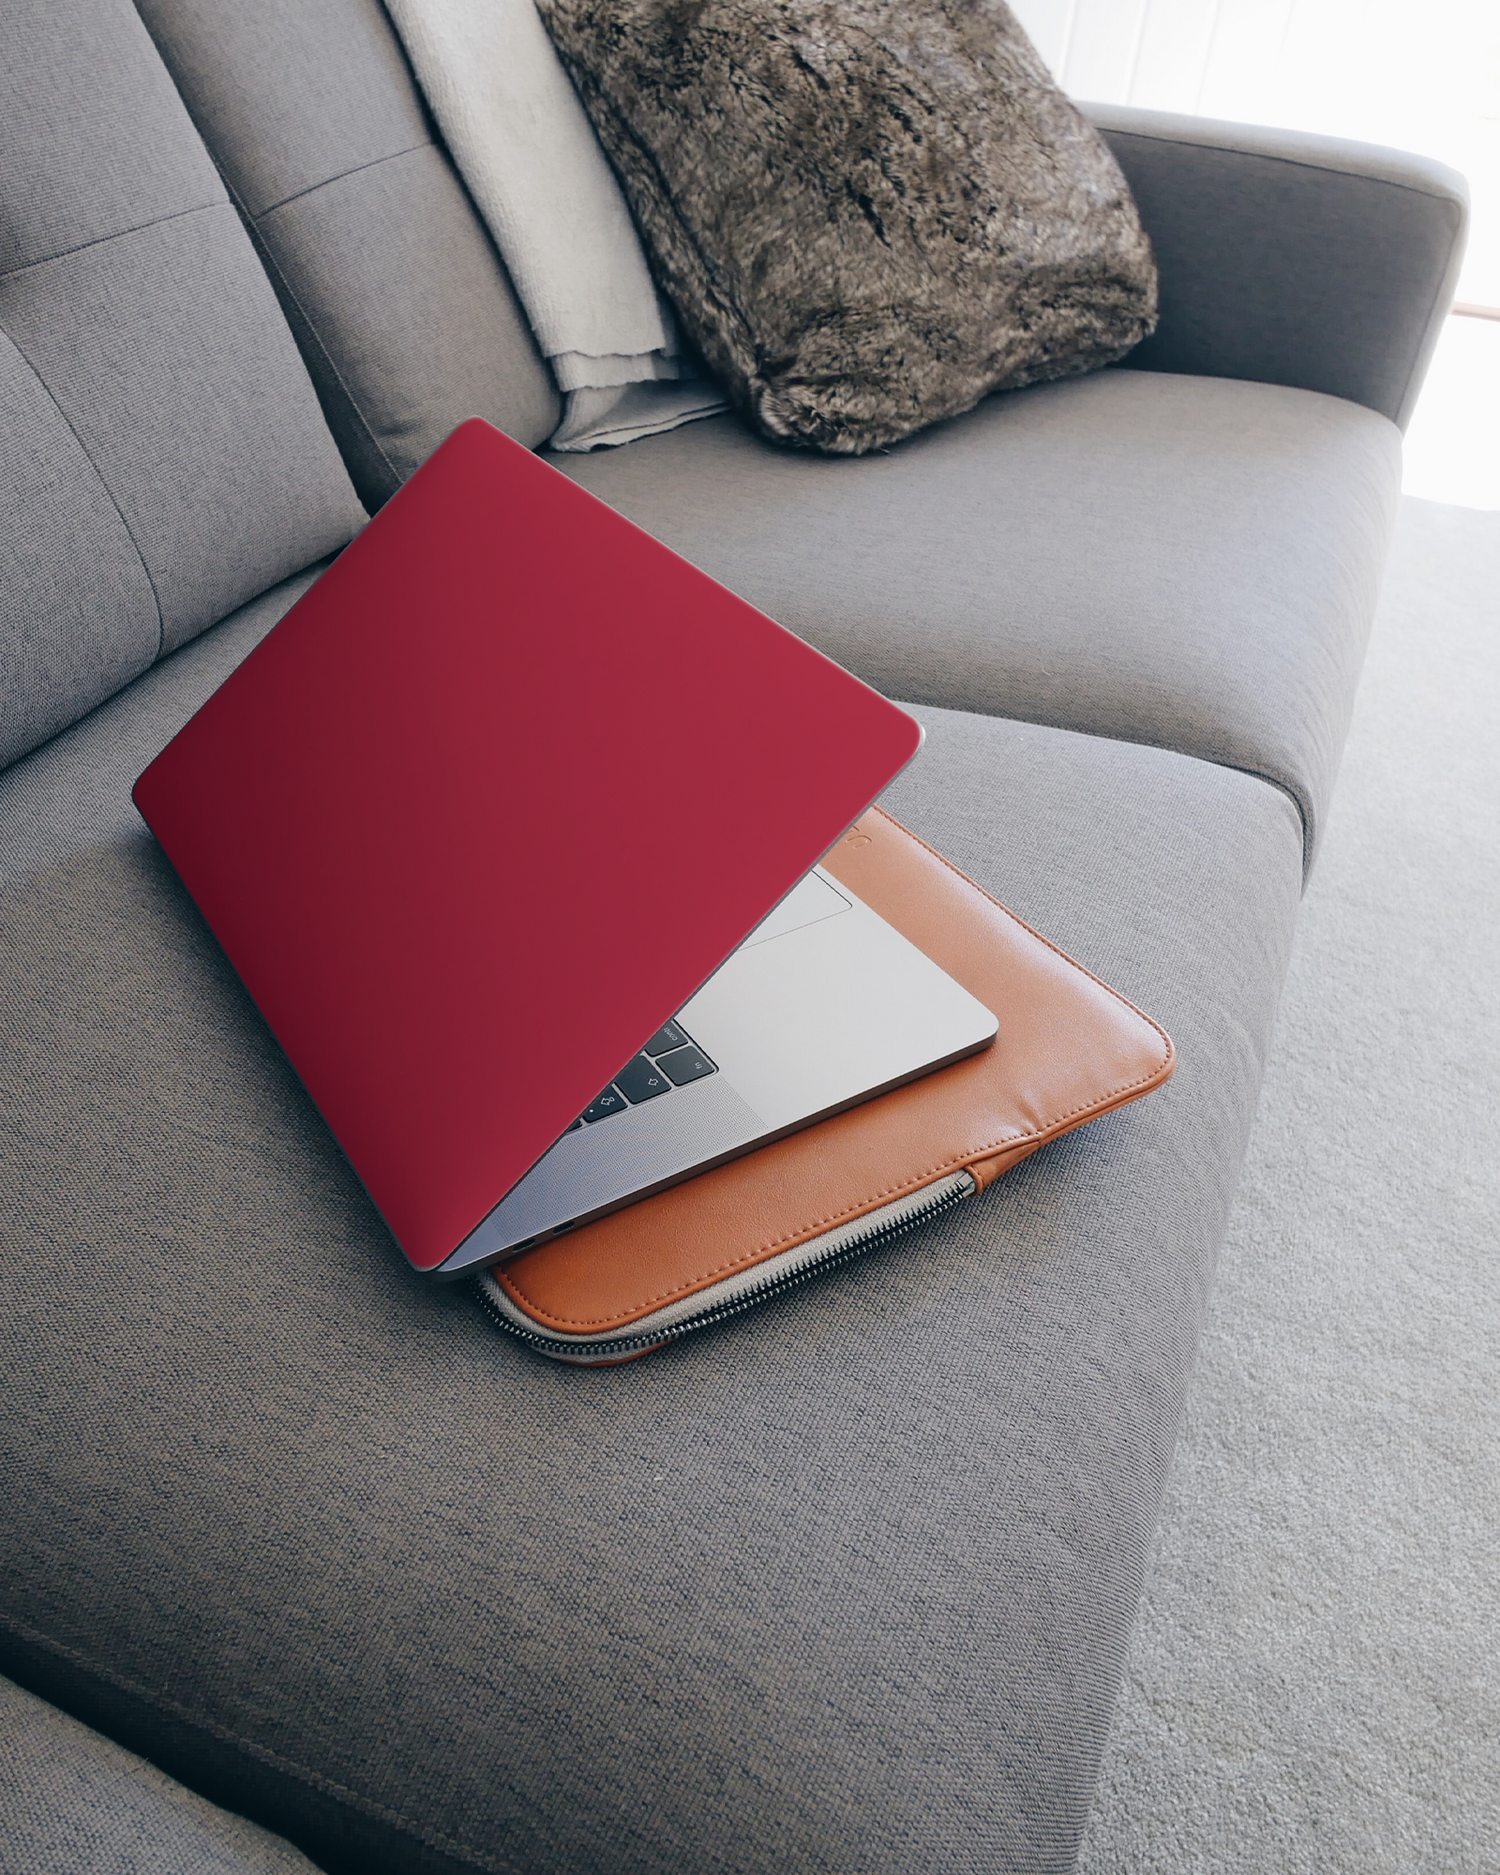 RED Laptop Skin for 15 inch Apple MacBooks on a couch